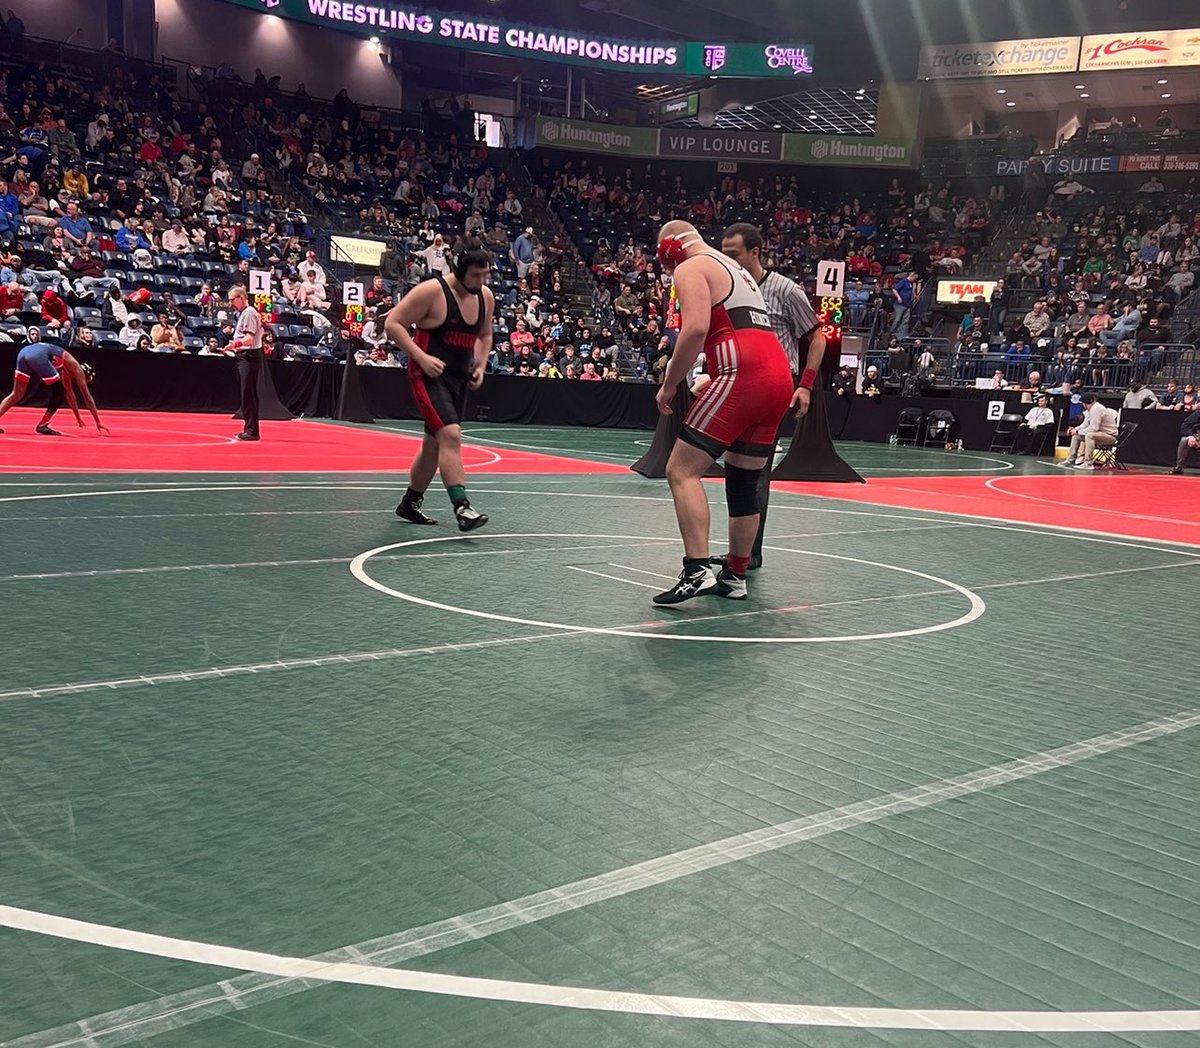 We are proud of our Shore wrestlers who wrestled in the OAC Junior High State Championships this past weekend! You’ve all had an awesome season! Keep up the great work! Sam M. Frankie N. Eli T. 👏💪 #DedicationDeterminationHardWorkTogether #WeHaveWhatItTakes #OnceACard